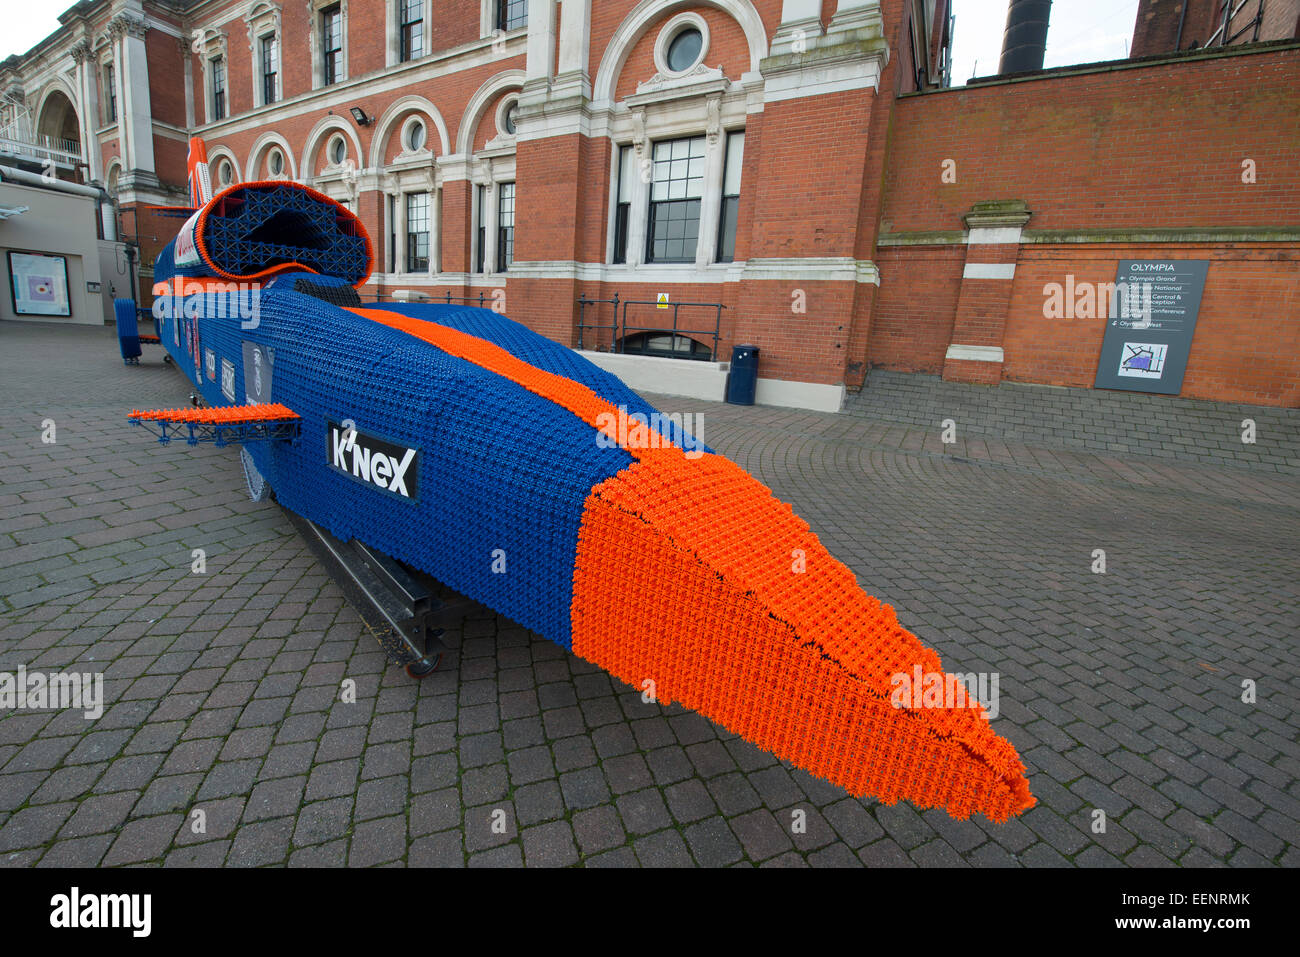 Kensington Olympia, London, UK. 20th January, 2015. The UK’s annual only dedicated toy, game and hobby trade show runs from 20th-22nd January with over 260 companies exhibiting thousands of products to buyers and the media. The BLOODHOUND K'NEX Car on display outside Olympia. Credit:  Malcolm Park editorial/Alamy Live News Stock Photo